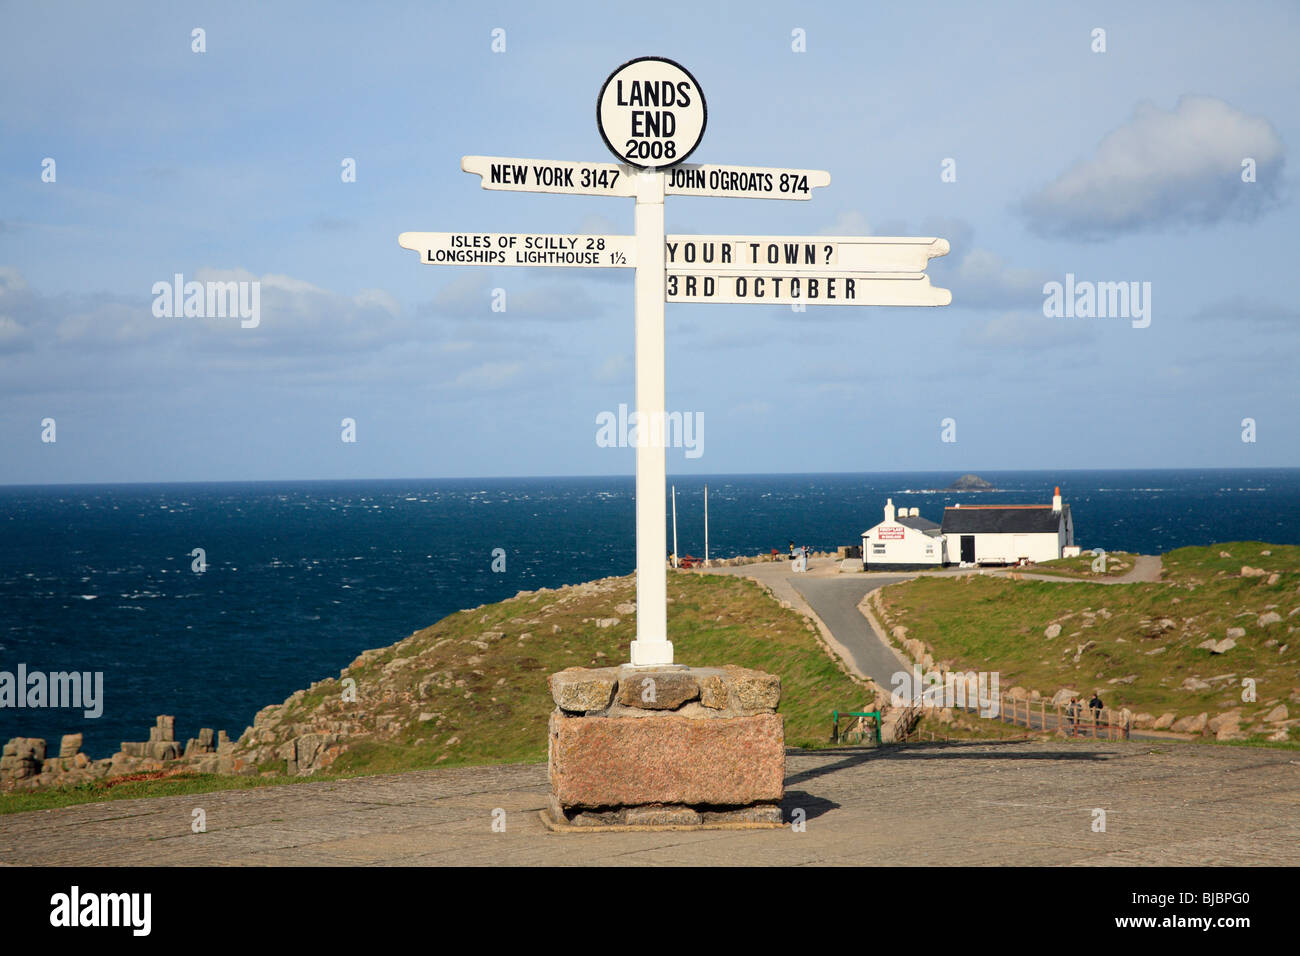 The iconic UK Lands End signpost is about to be removed after six